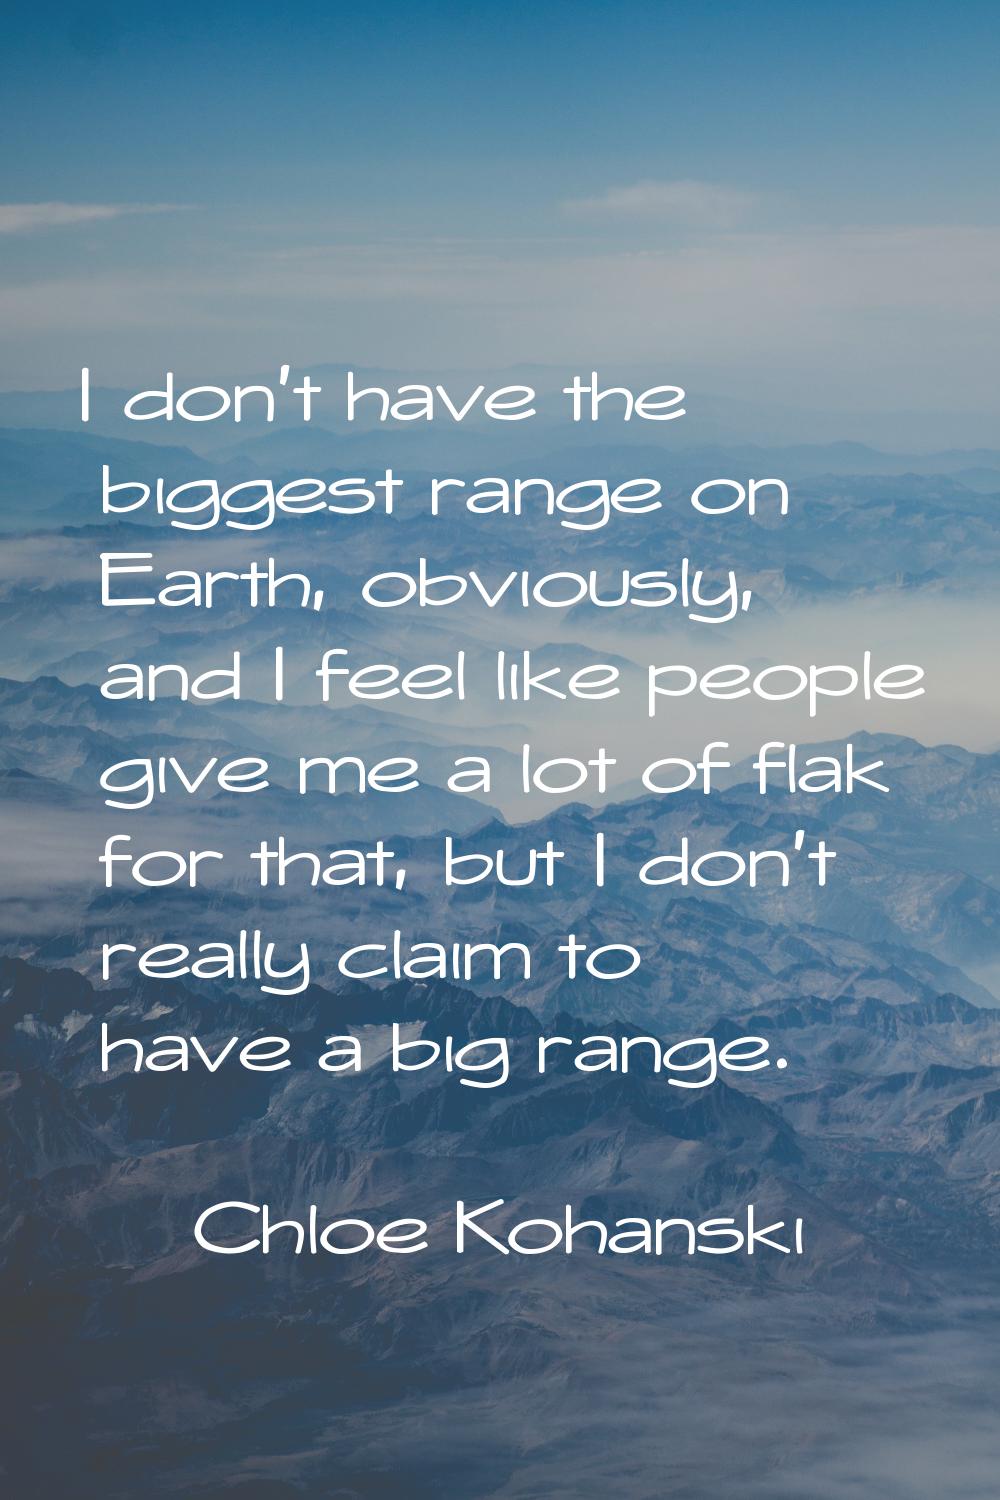 I don't have the biggest range on Earth, obviously, and I feel like people give me a lot of flak fo